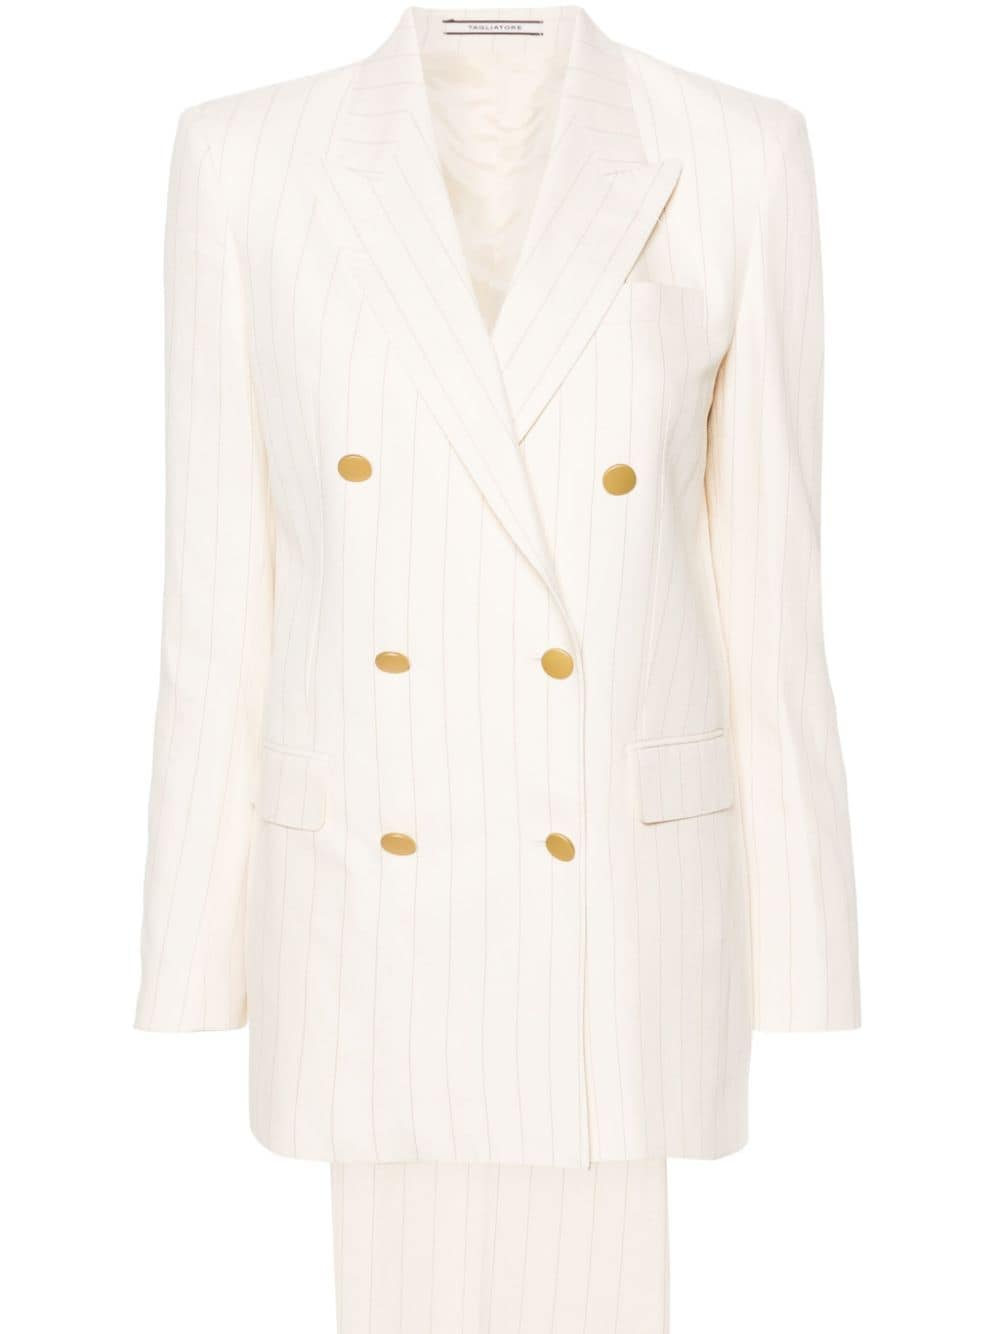 Tagliatore pinstriped double-breasted suit - Nude